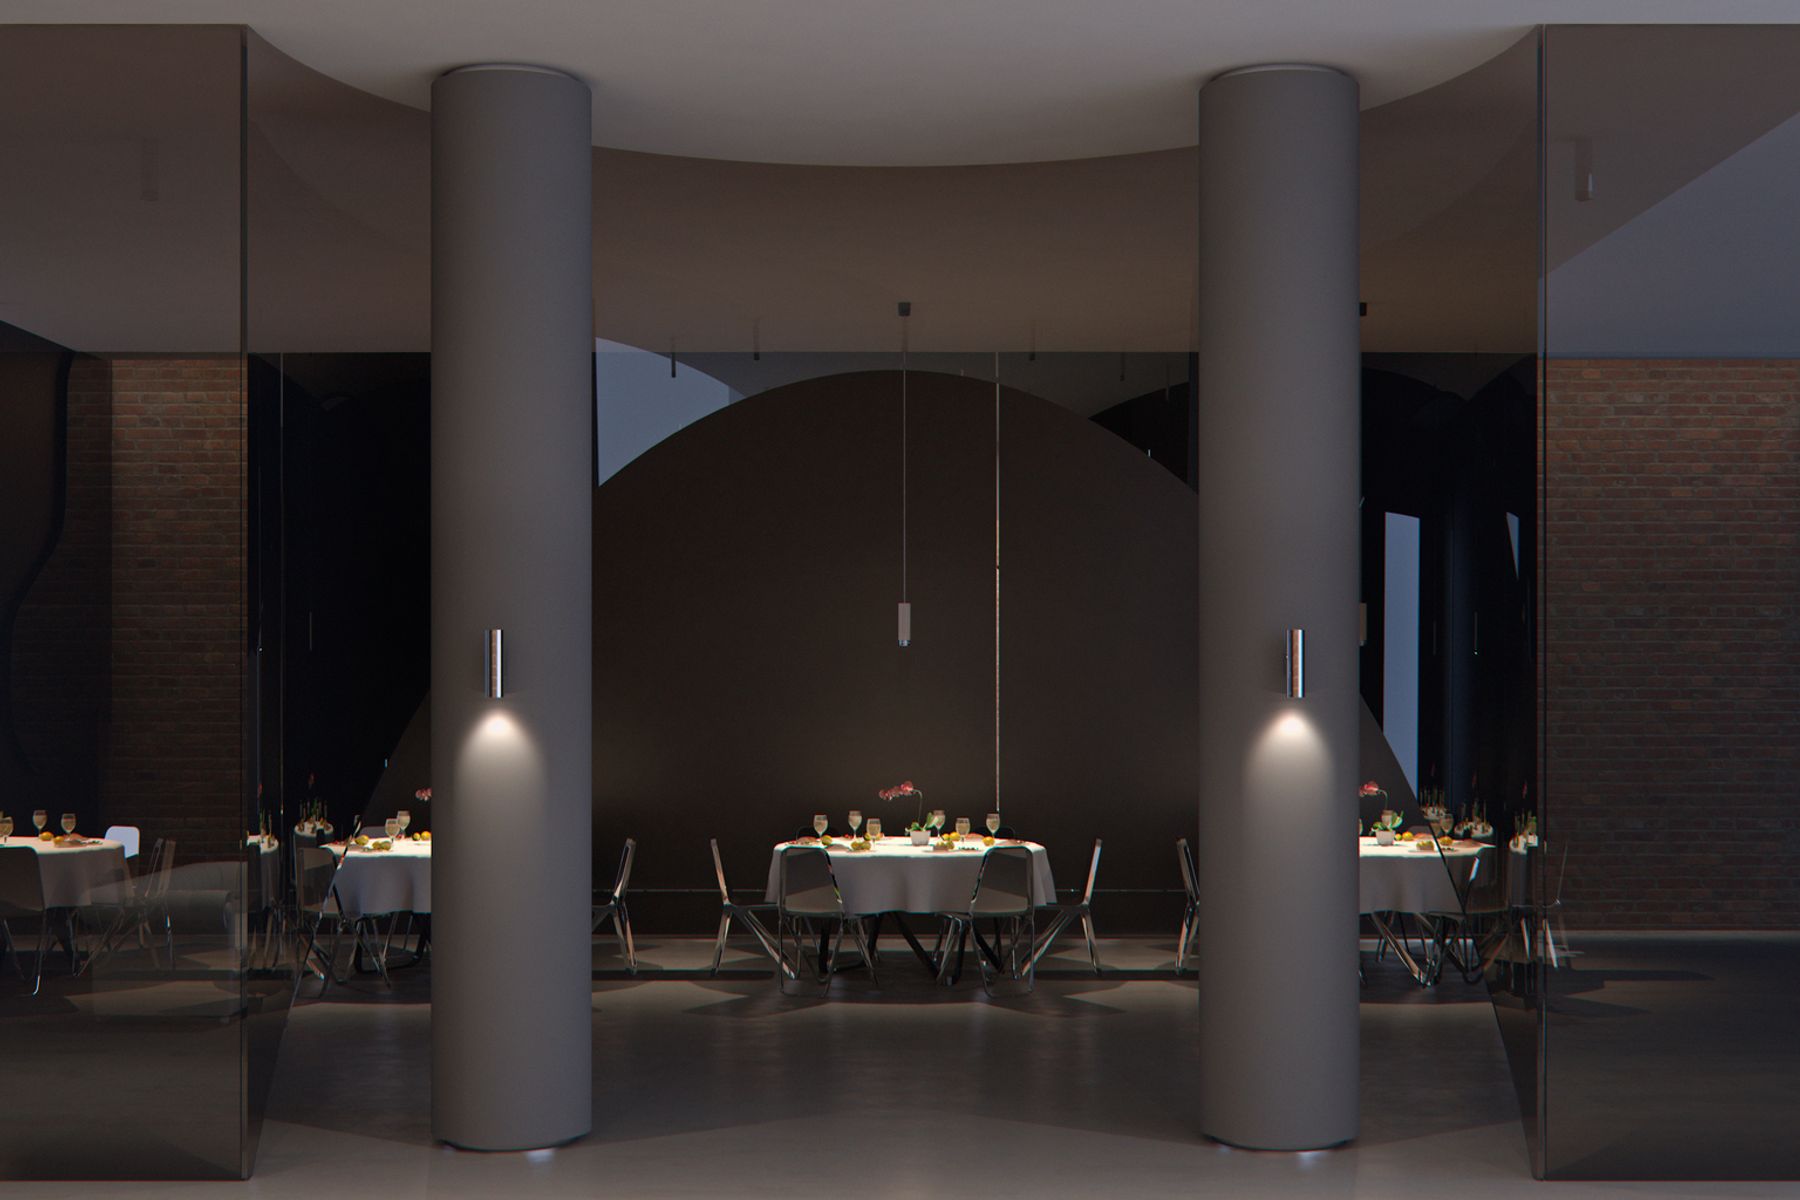 Starpoint wall-mounted luminaires stand for sophisticated design and mood lighting, creating a visual rhythm whilst emphasising vertical architectural features.